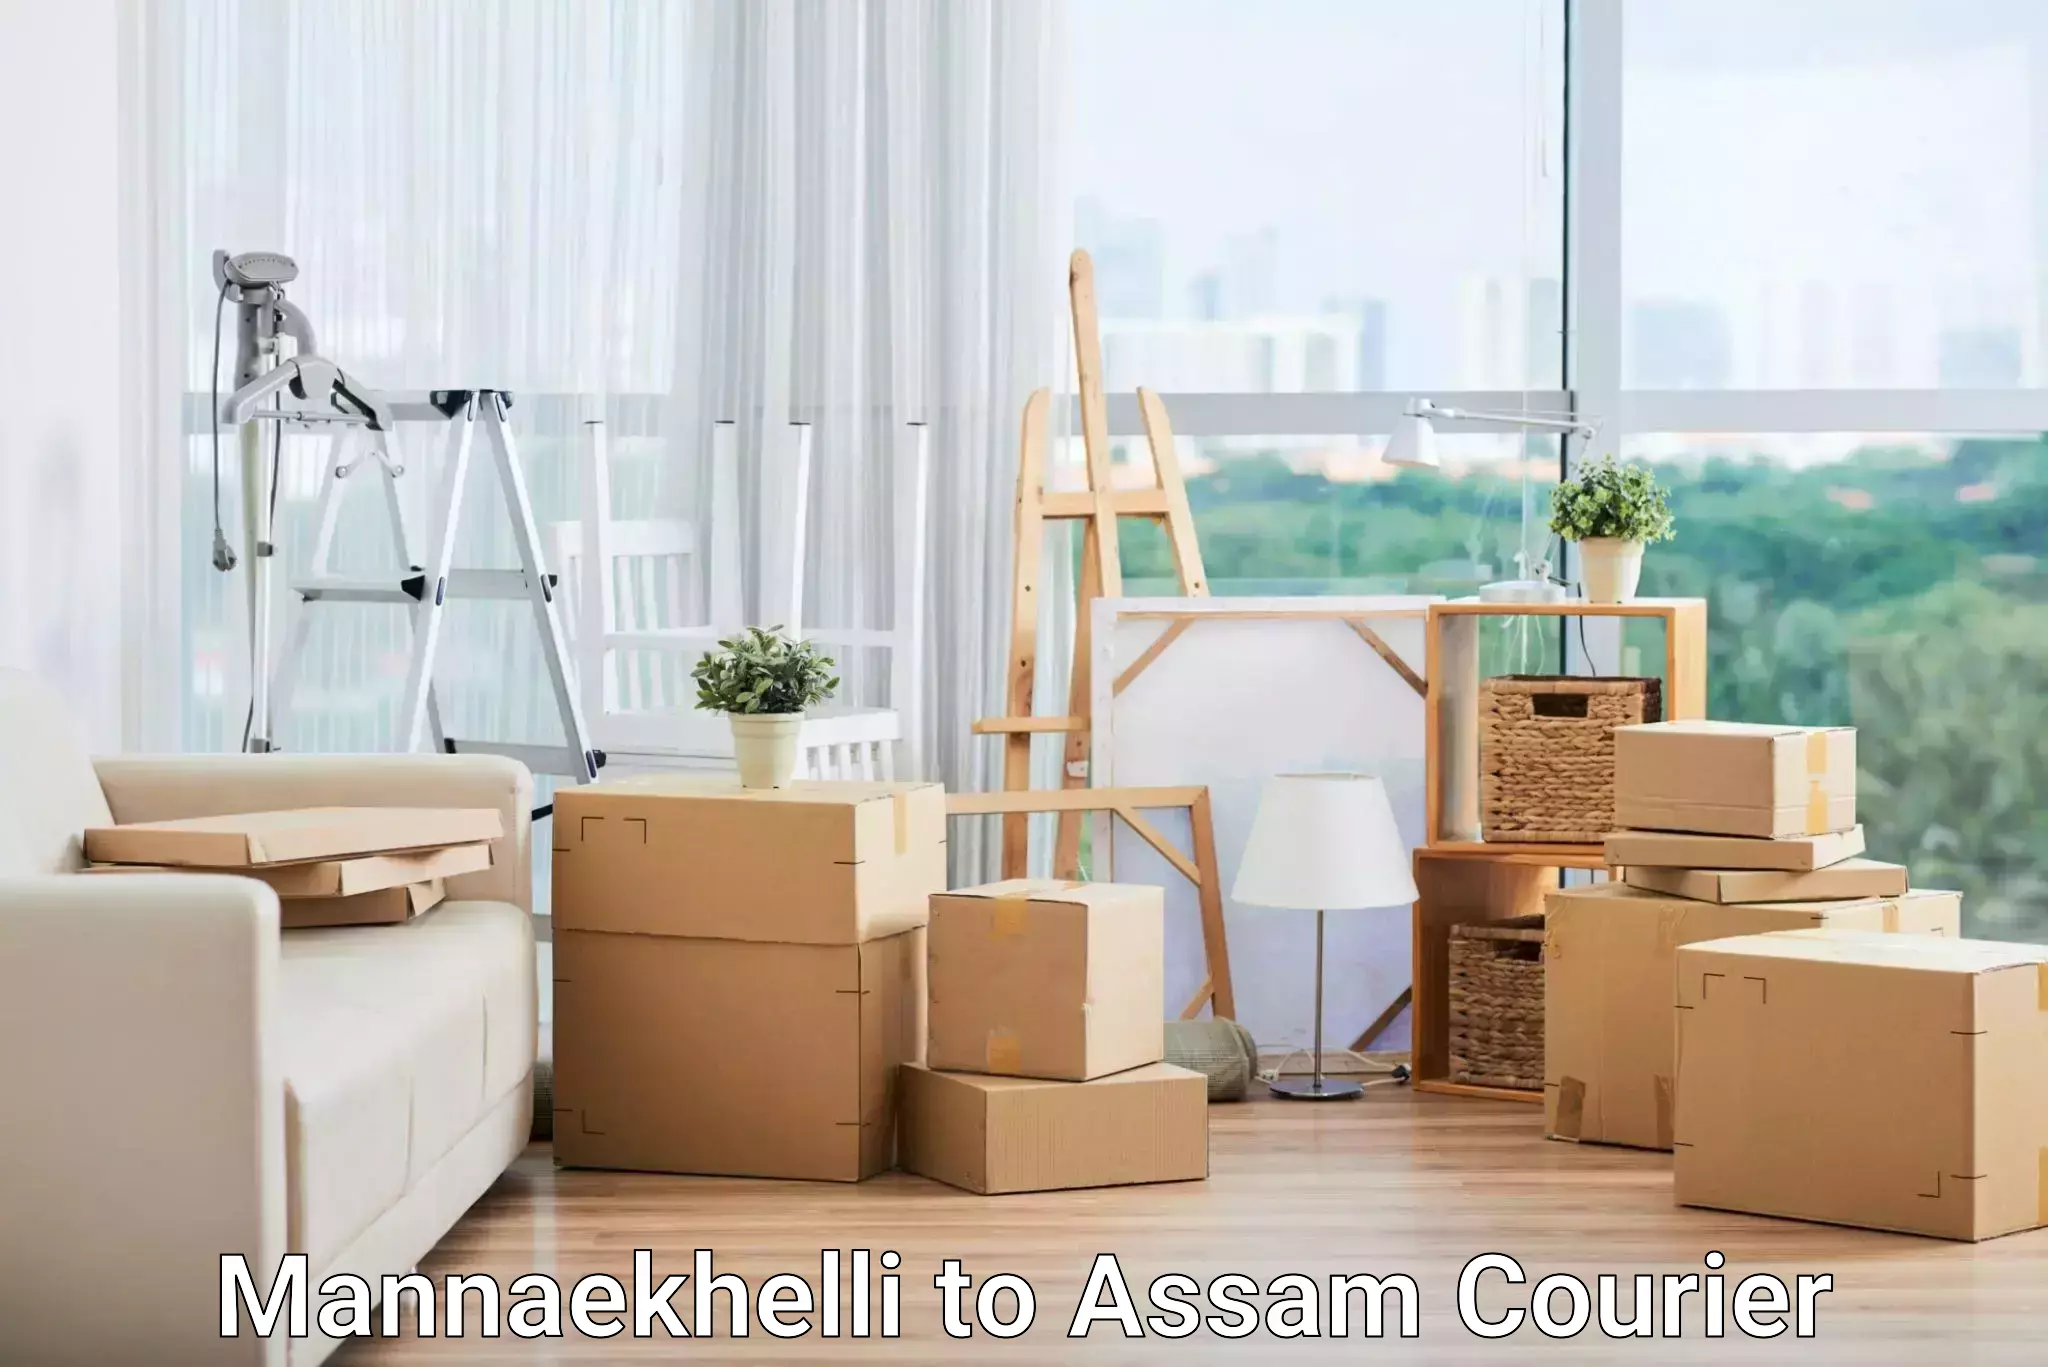 Package delivery network Mannaekhelli to Assam